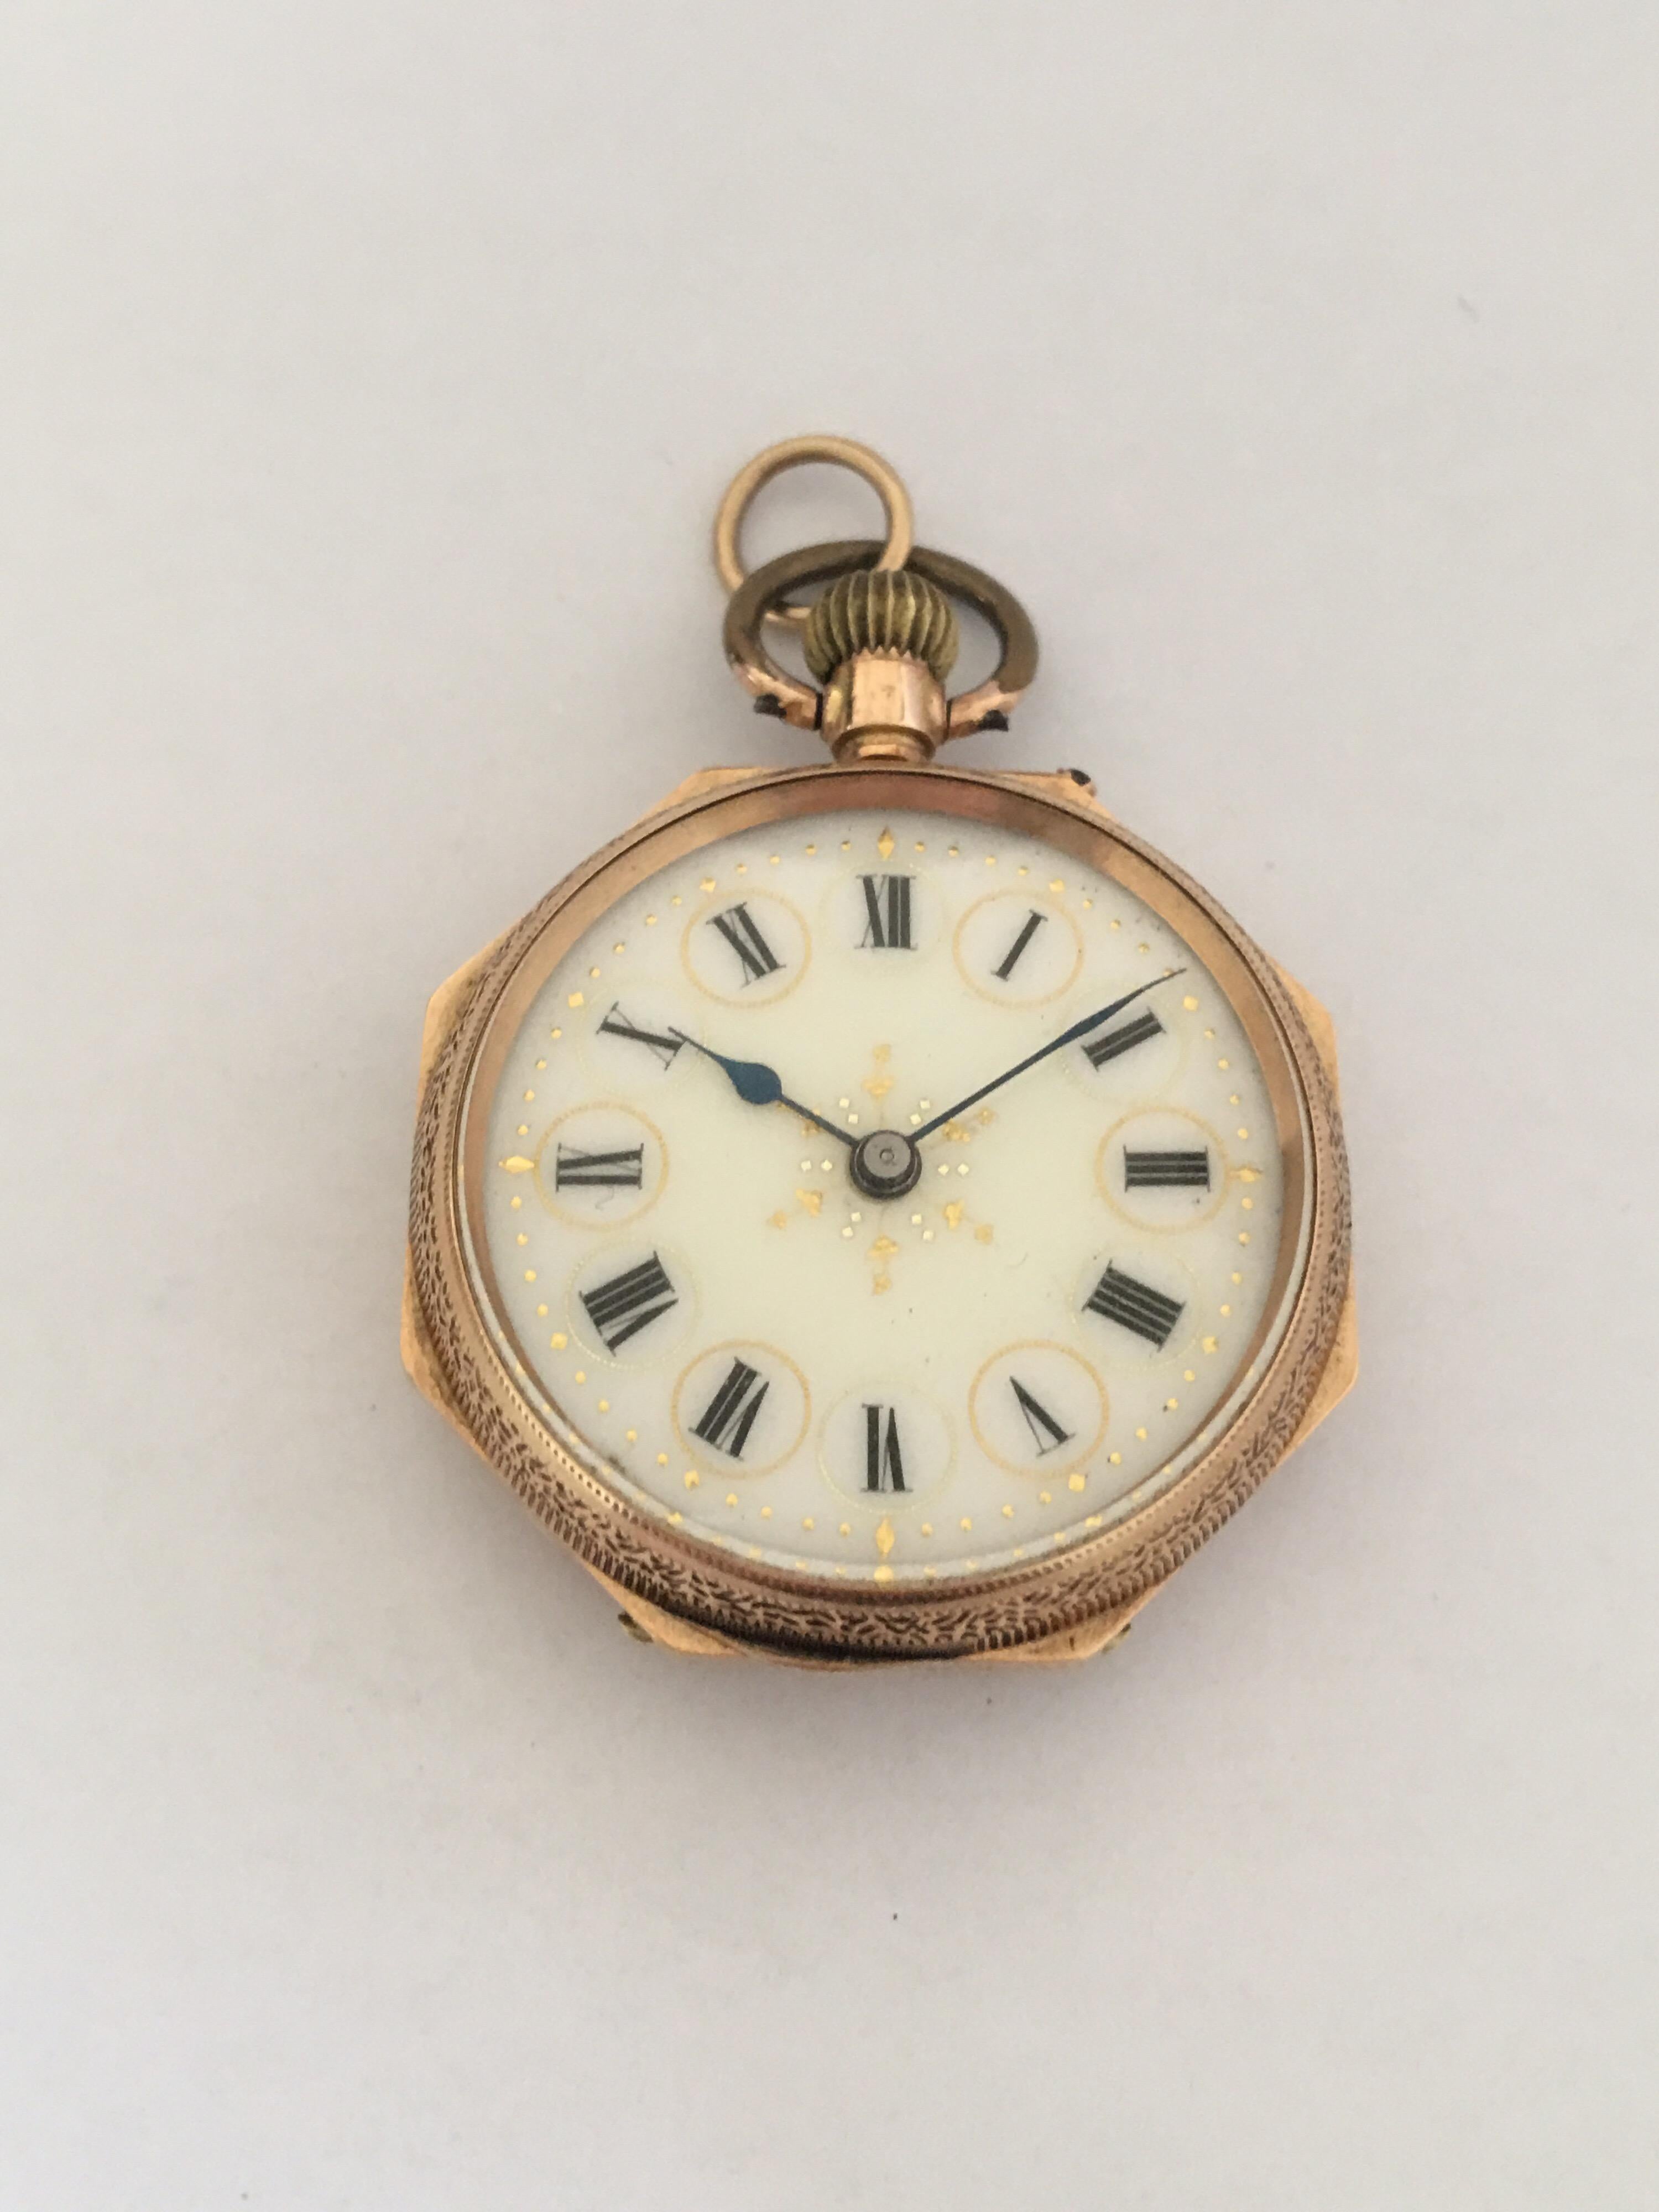 
Condition:

This beautiful 32mm diameter full engraved case gold pocket watch is in good working condition and it is ticking well. Visible signs of wearing with some white enamel worn on the back cover flower petals as shown. the hard metal ring